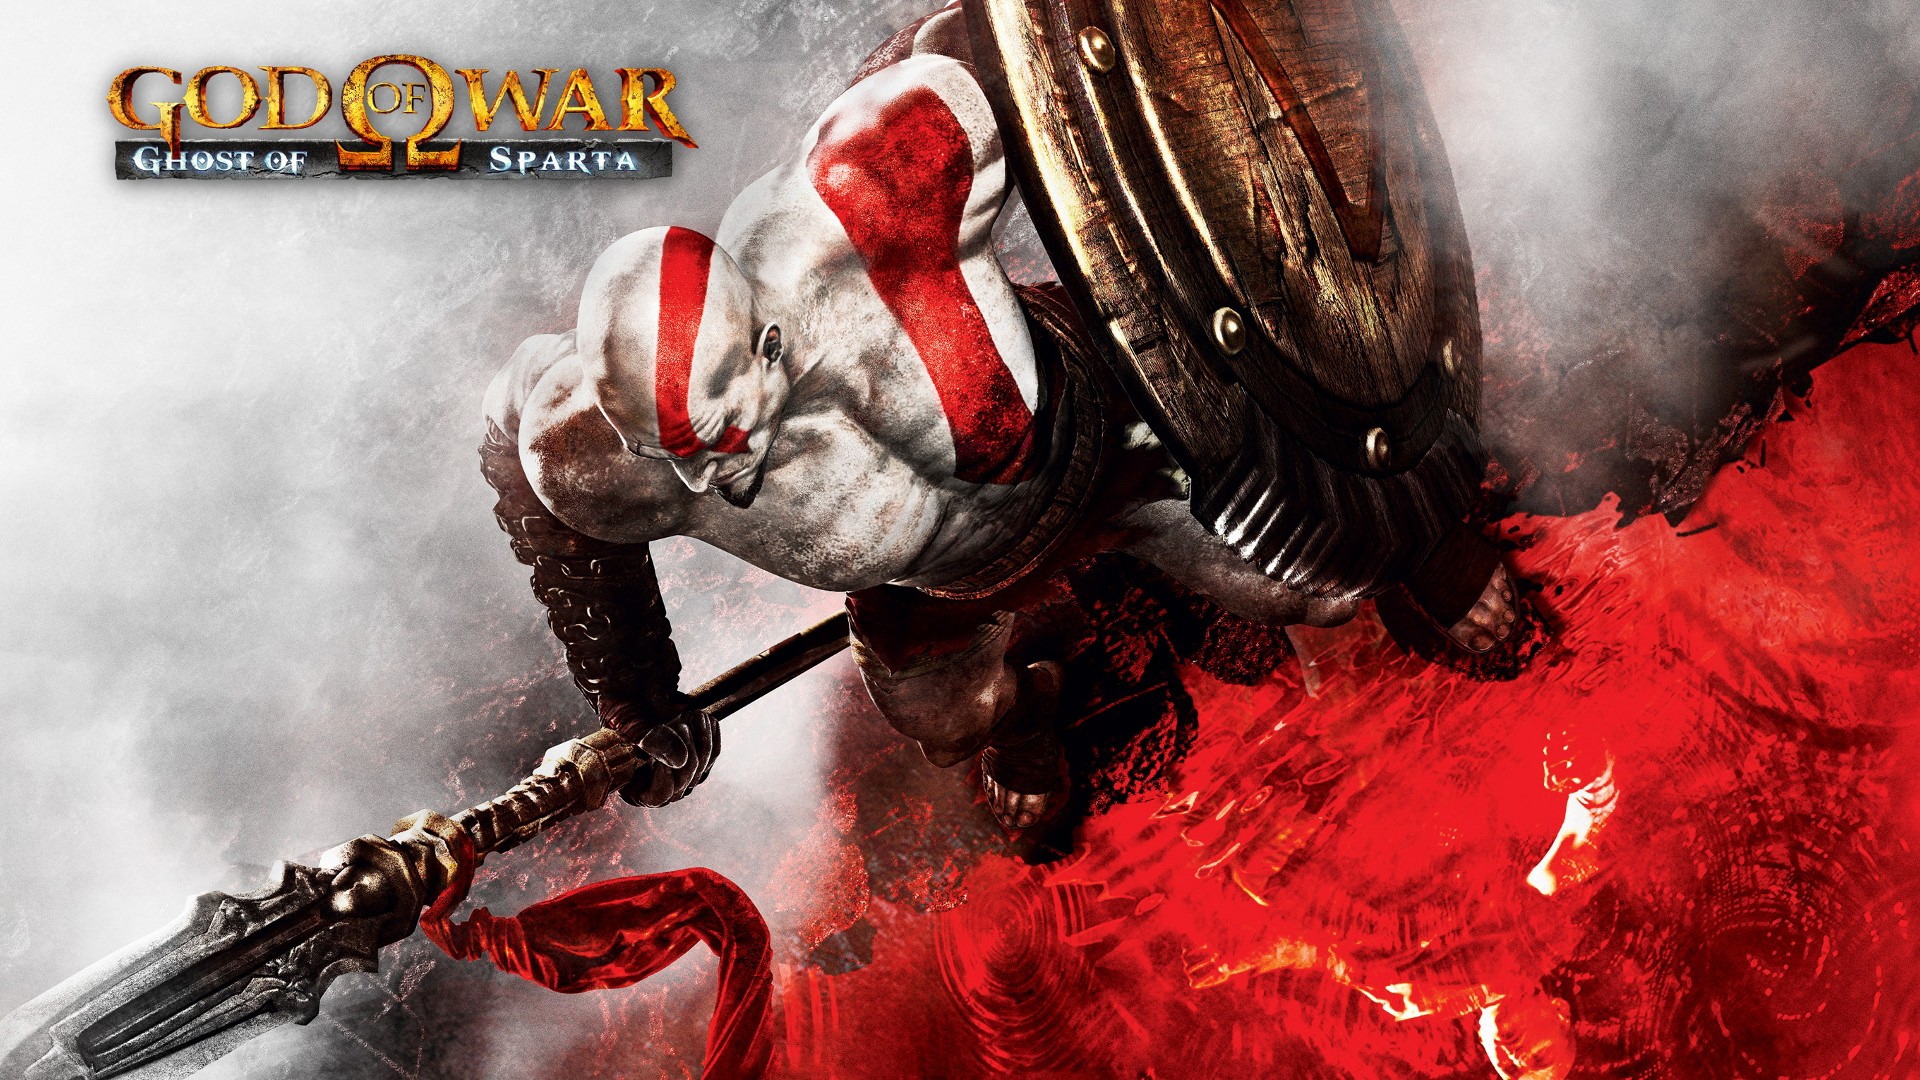 God of War Ghost of Sparta for 1920 x 1080 HDTV 1080p resolution